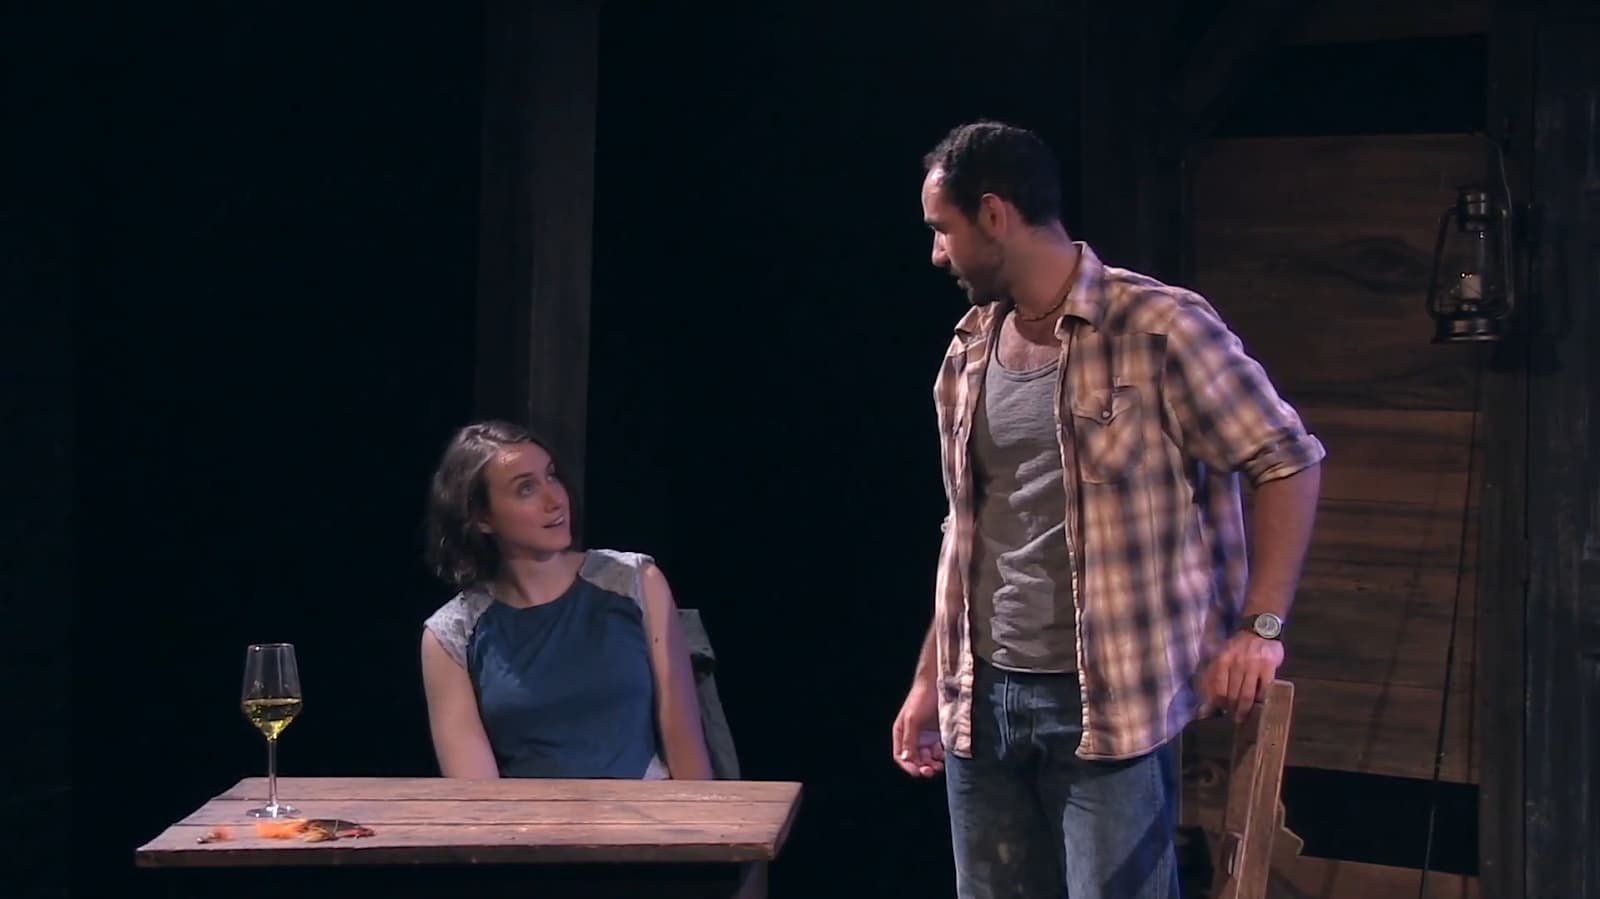 Two actors share a scene at a rustic table on stage